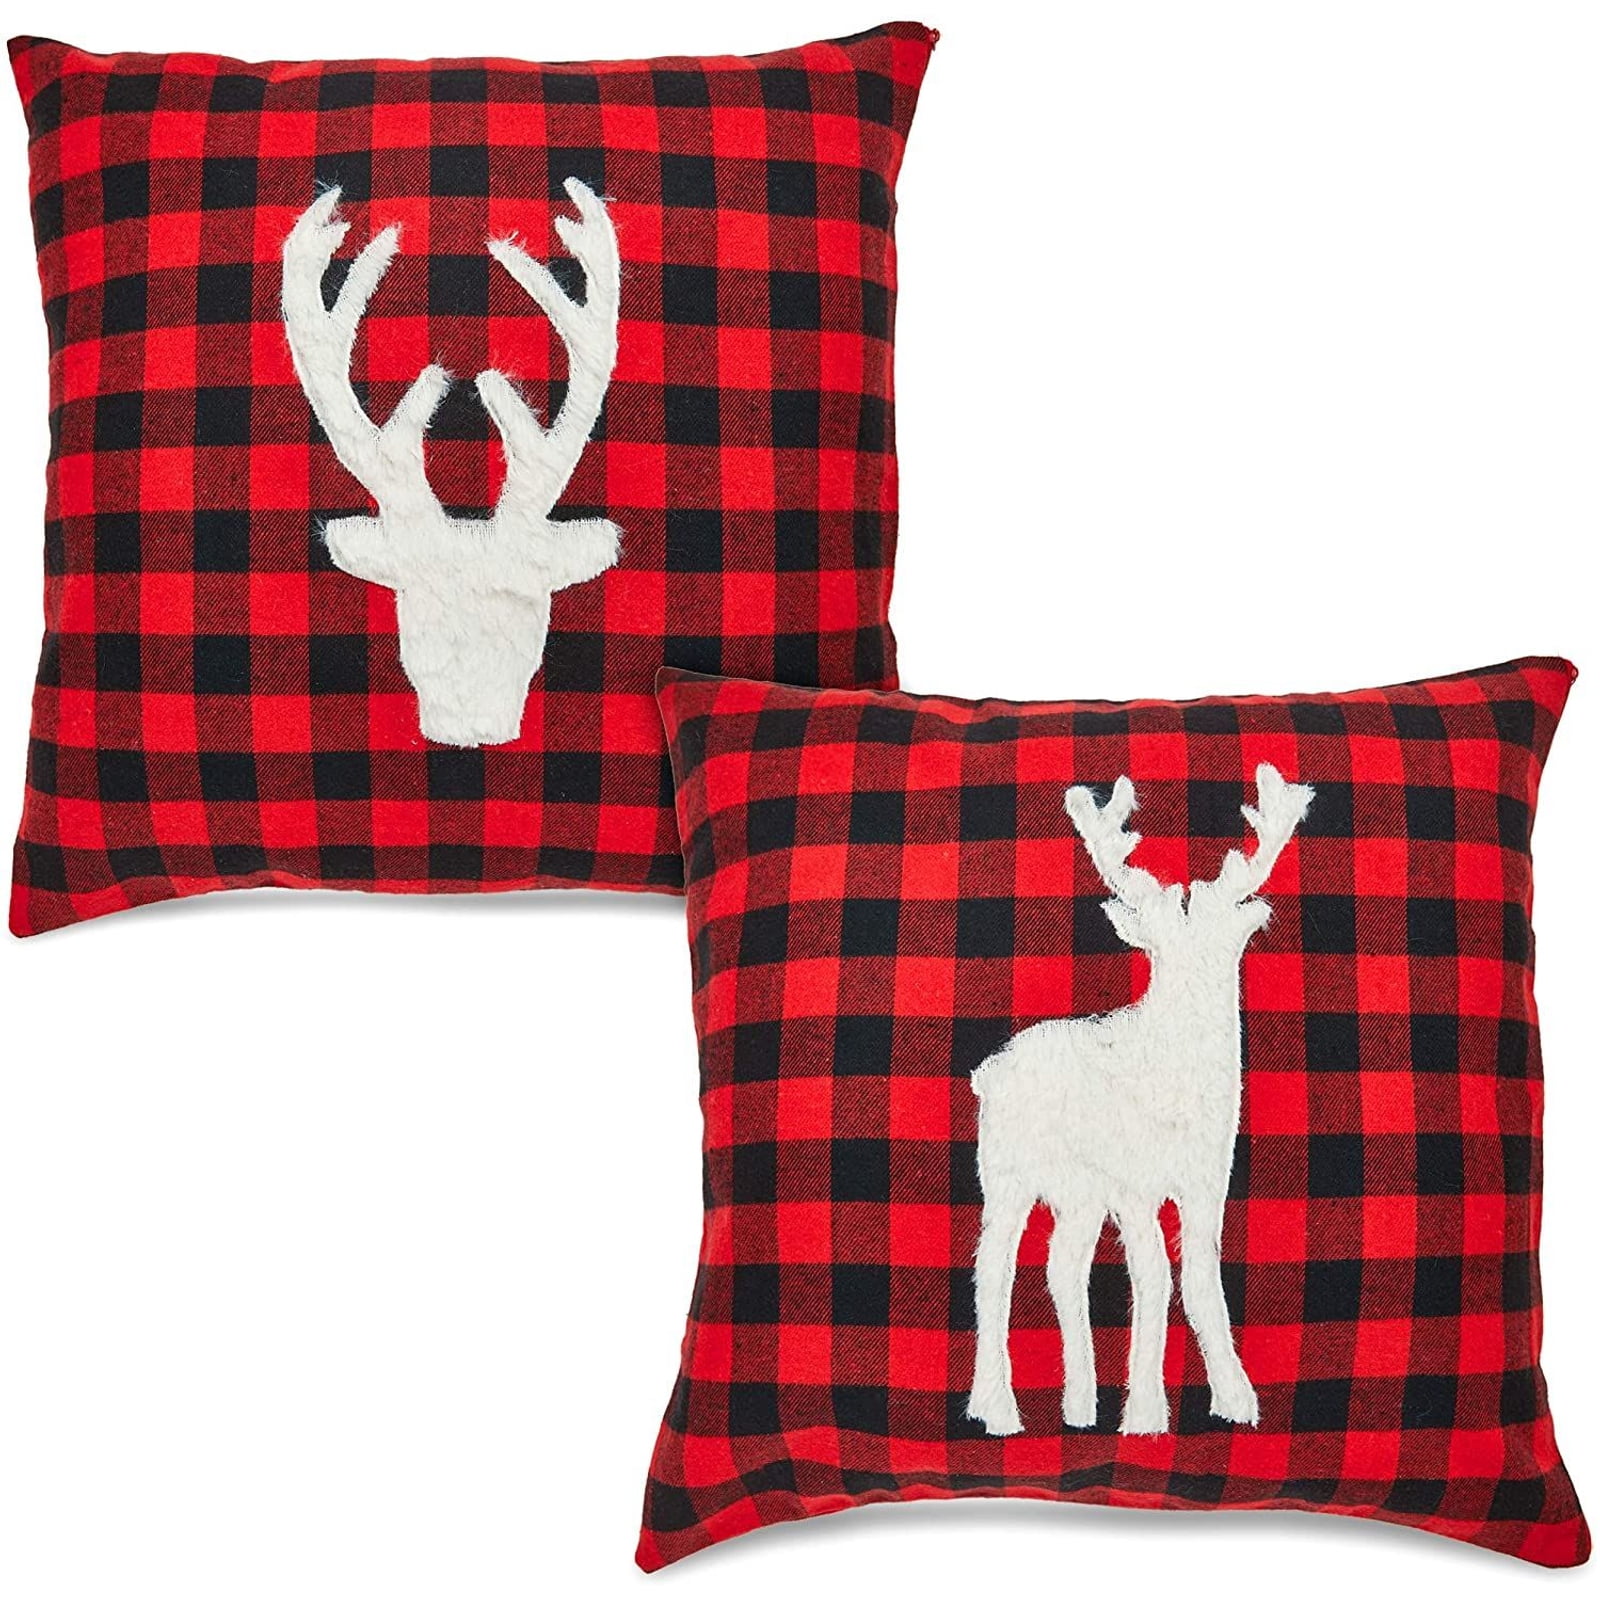 RED CHRISTMAS PILLOWS Red Decorative Throw Pillows Deer Red Holiday Throw Pillow Covers Reindeer Christmas Pillow Covers home decor